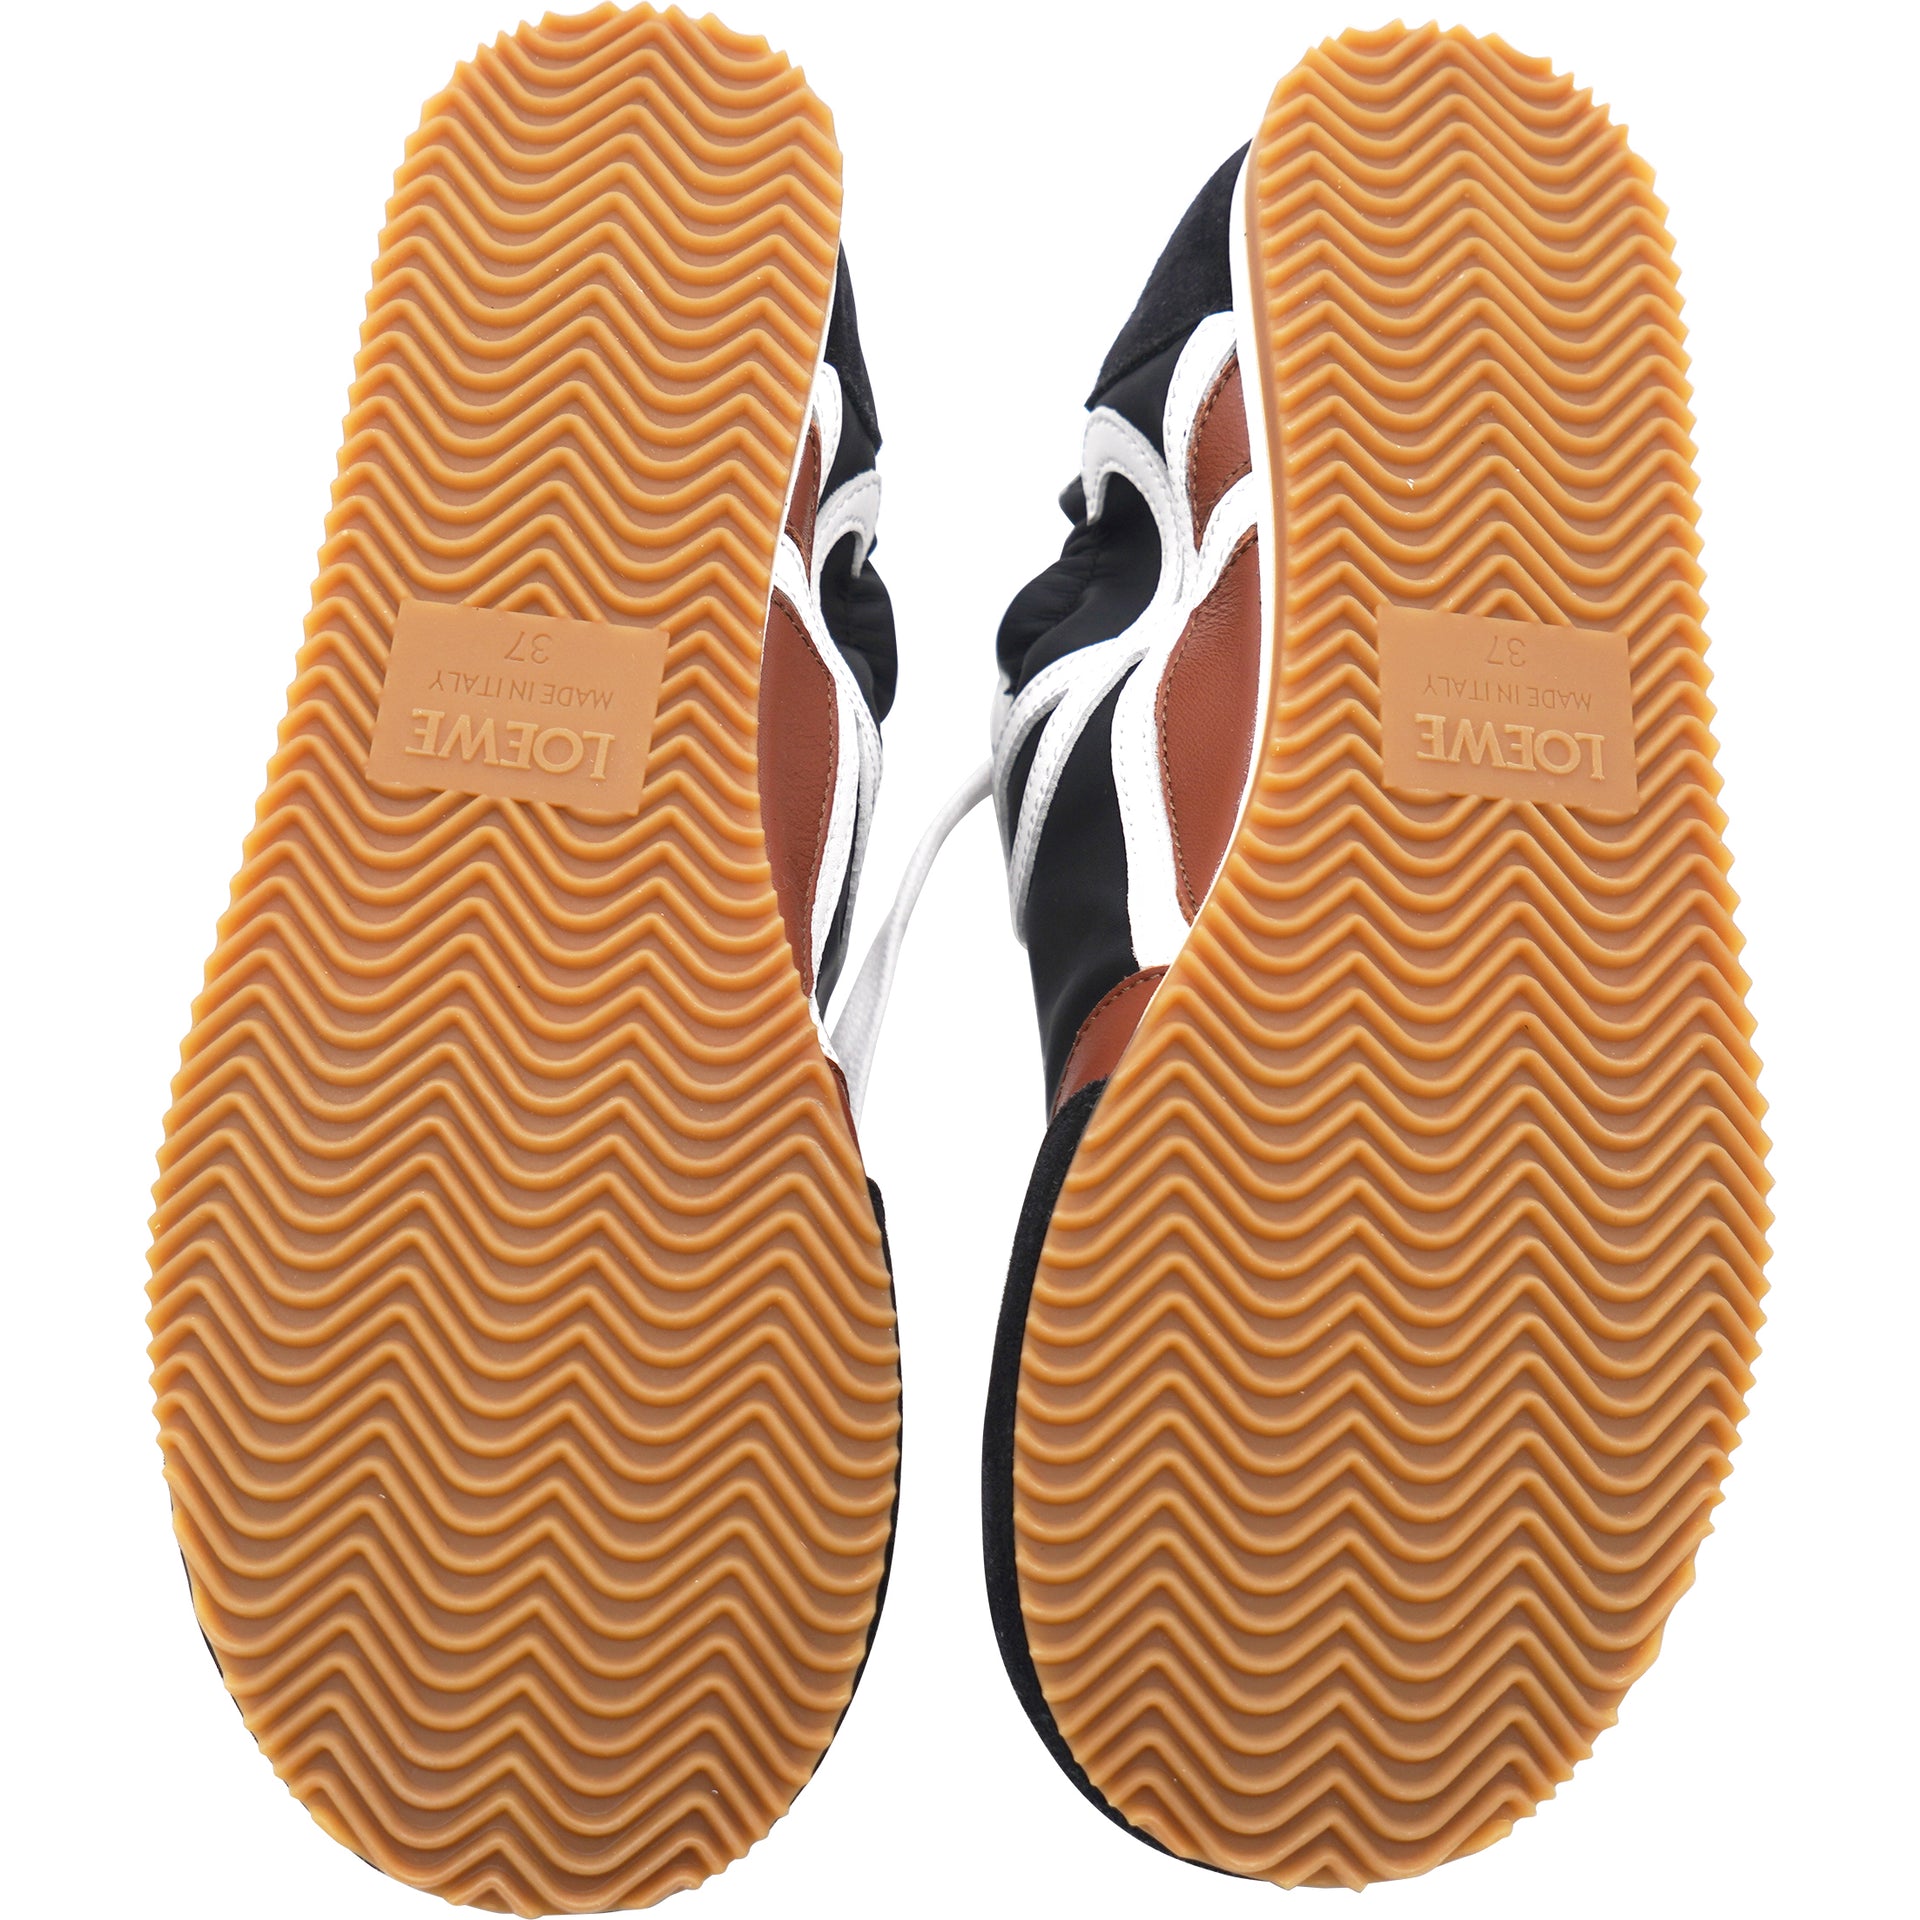 Flow Runner Nylon and Suede Black/Tan/White 37